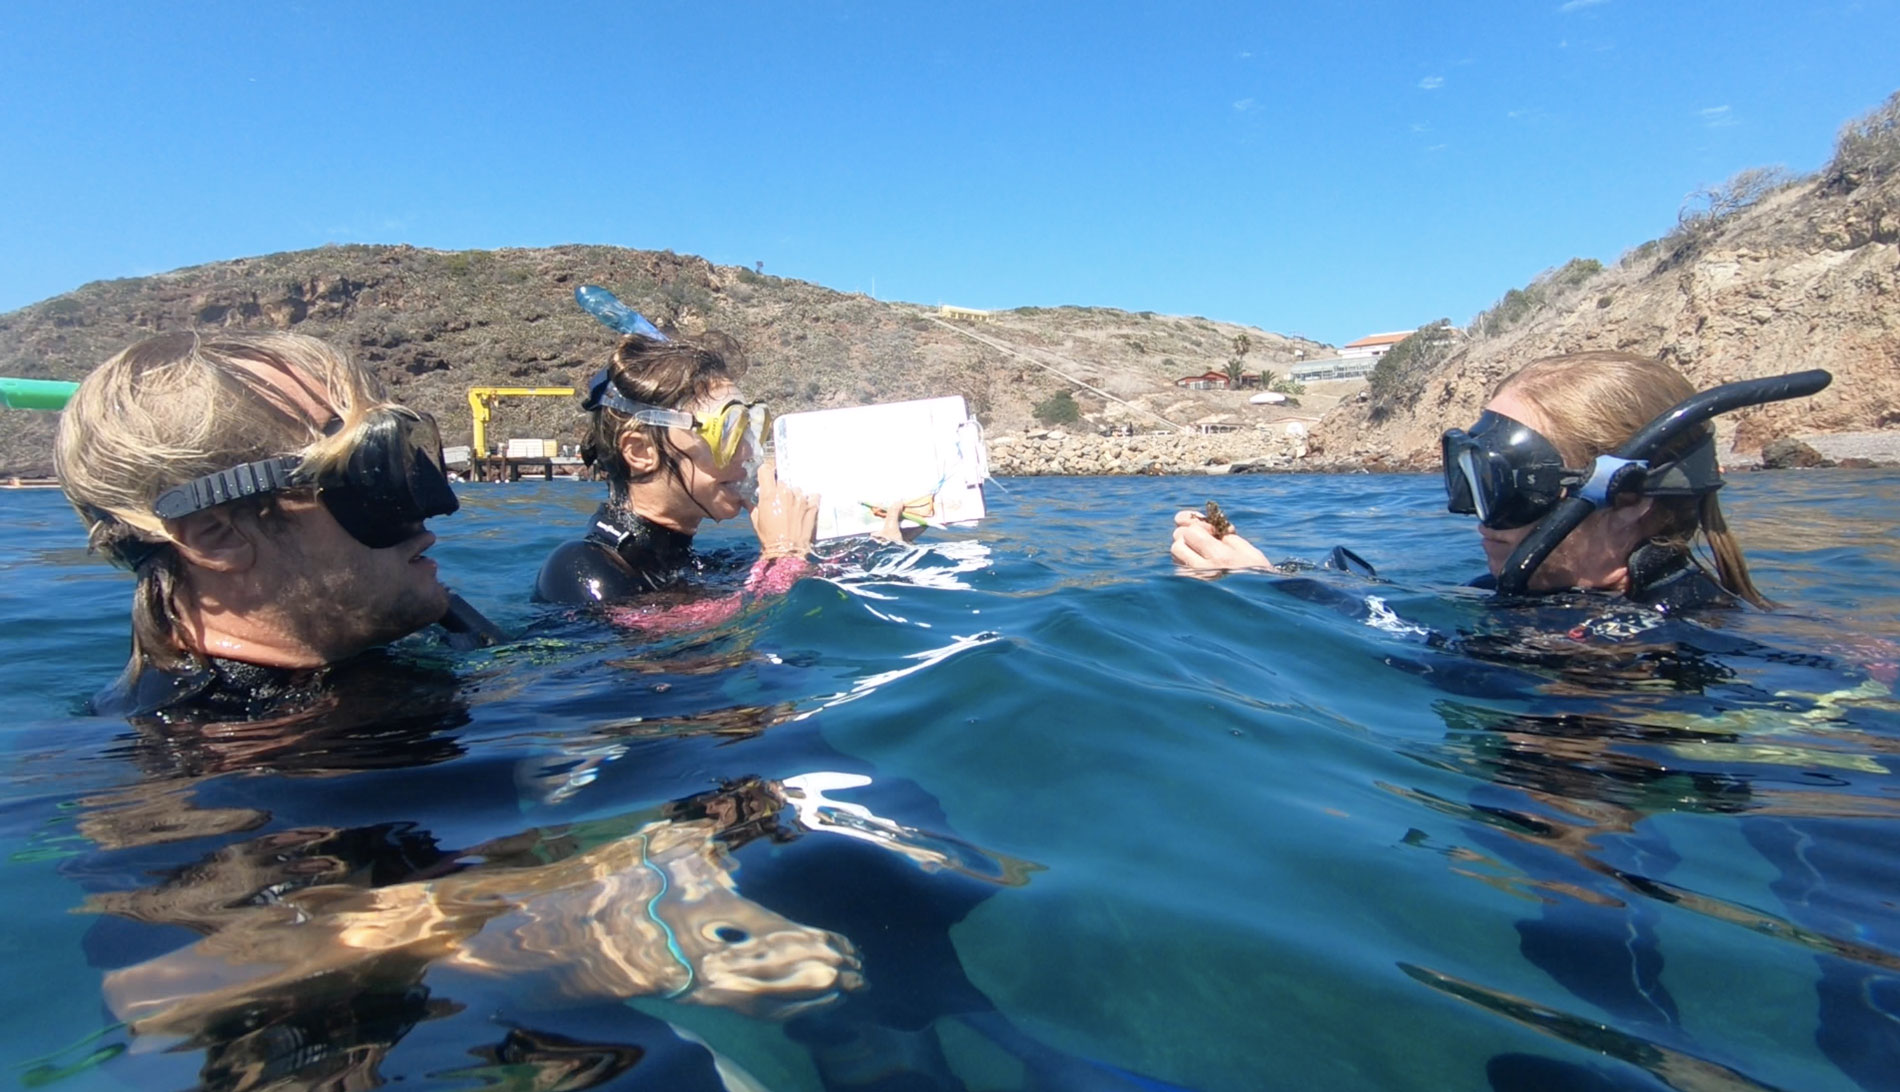 Snorkel divers in the water off of an island looking at a clipboard.